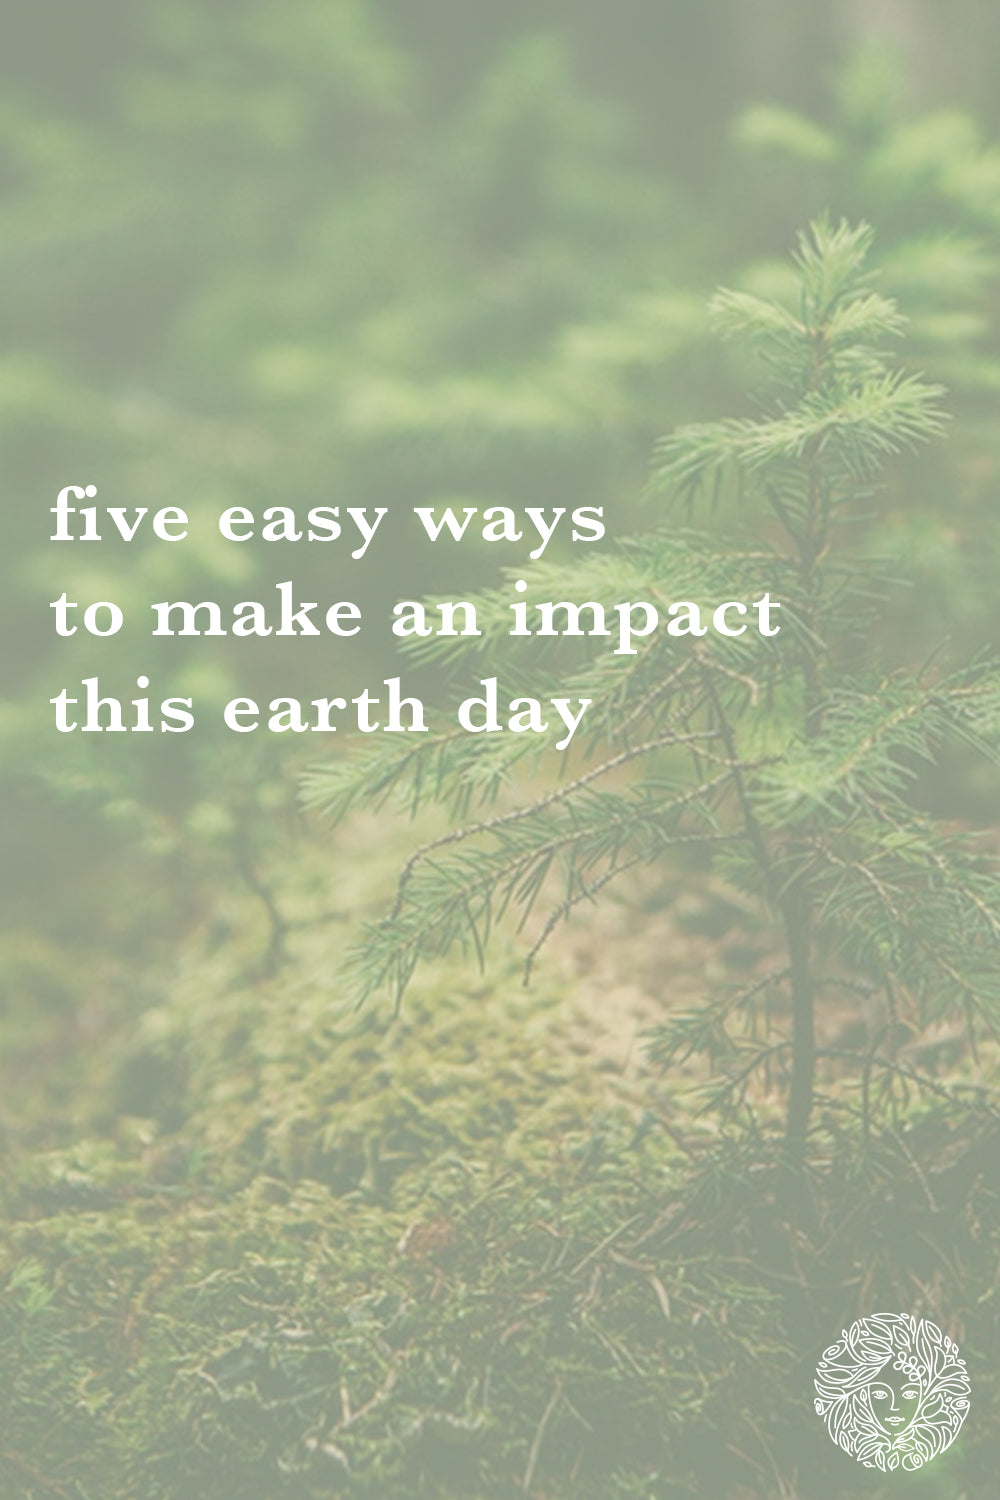 5 Easy Ways to Make an Impact this Earth Day